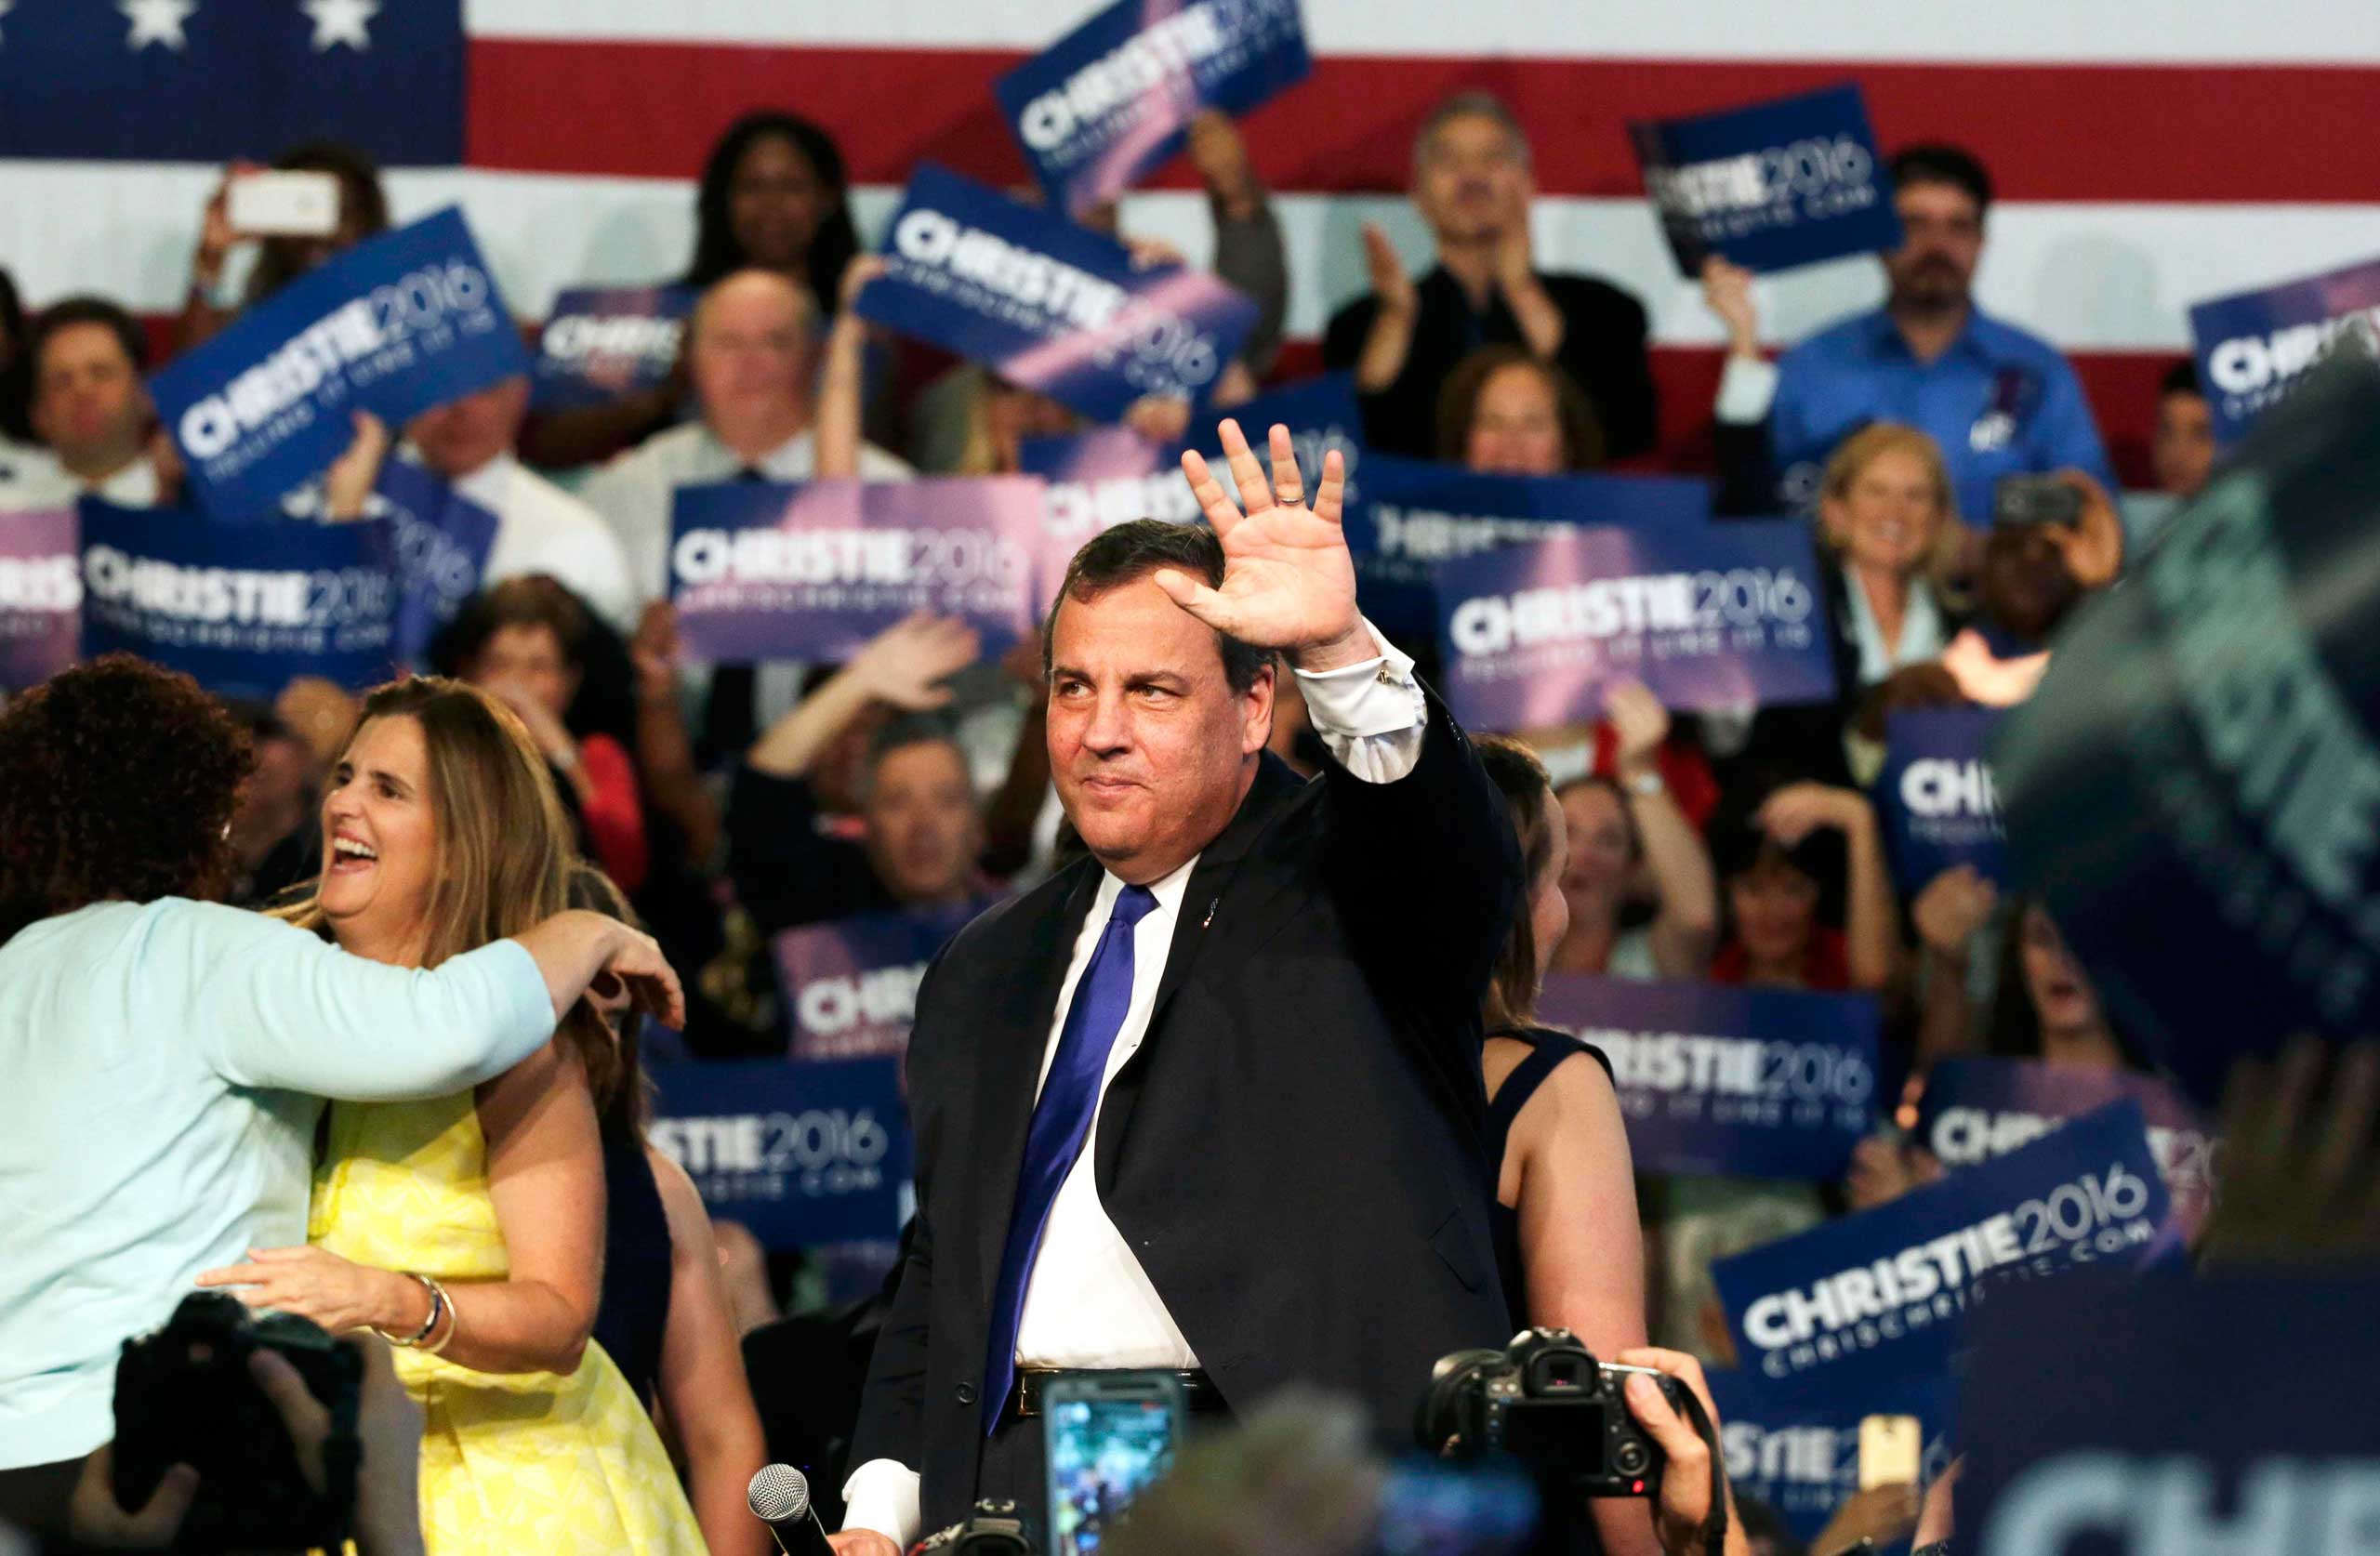 Republican presidential candidate and New Jersey Governor Chris Christie formally announces his campaign for the 2016 Republican presidential nomination during a kickoff rally at Livingston High School in Livingston, N.J. on  June 30, 2015.